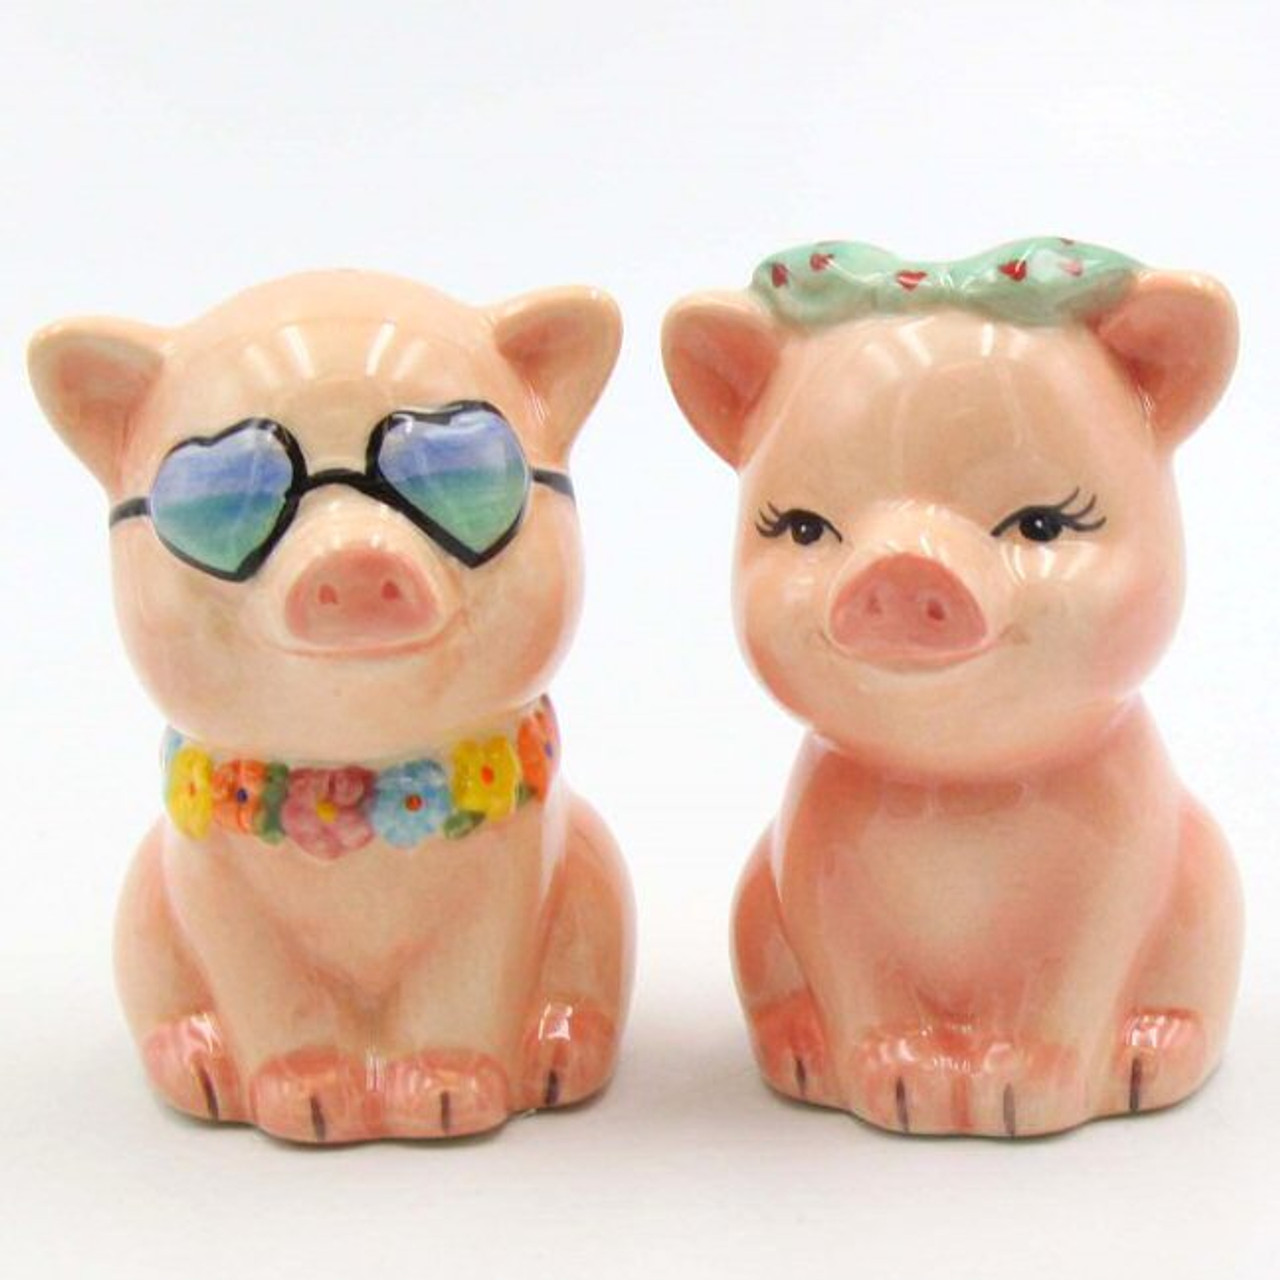 https://cdn11.bigcommerce.com/s-oo0gdojvjo/images/stencil/1280x1280/products/55963/77351/21001-happy-pigs-ceramic-salt-and-pepper-shakers-set-of-4-cosmos__24186.1606057469.jpg?c=2